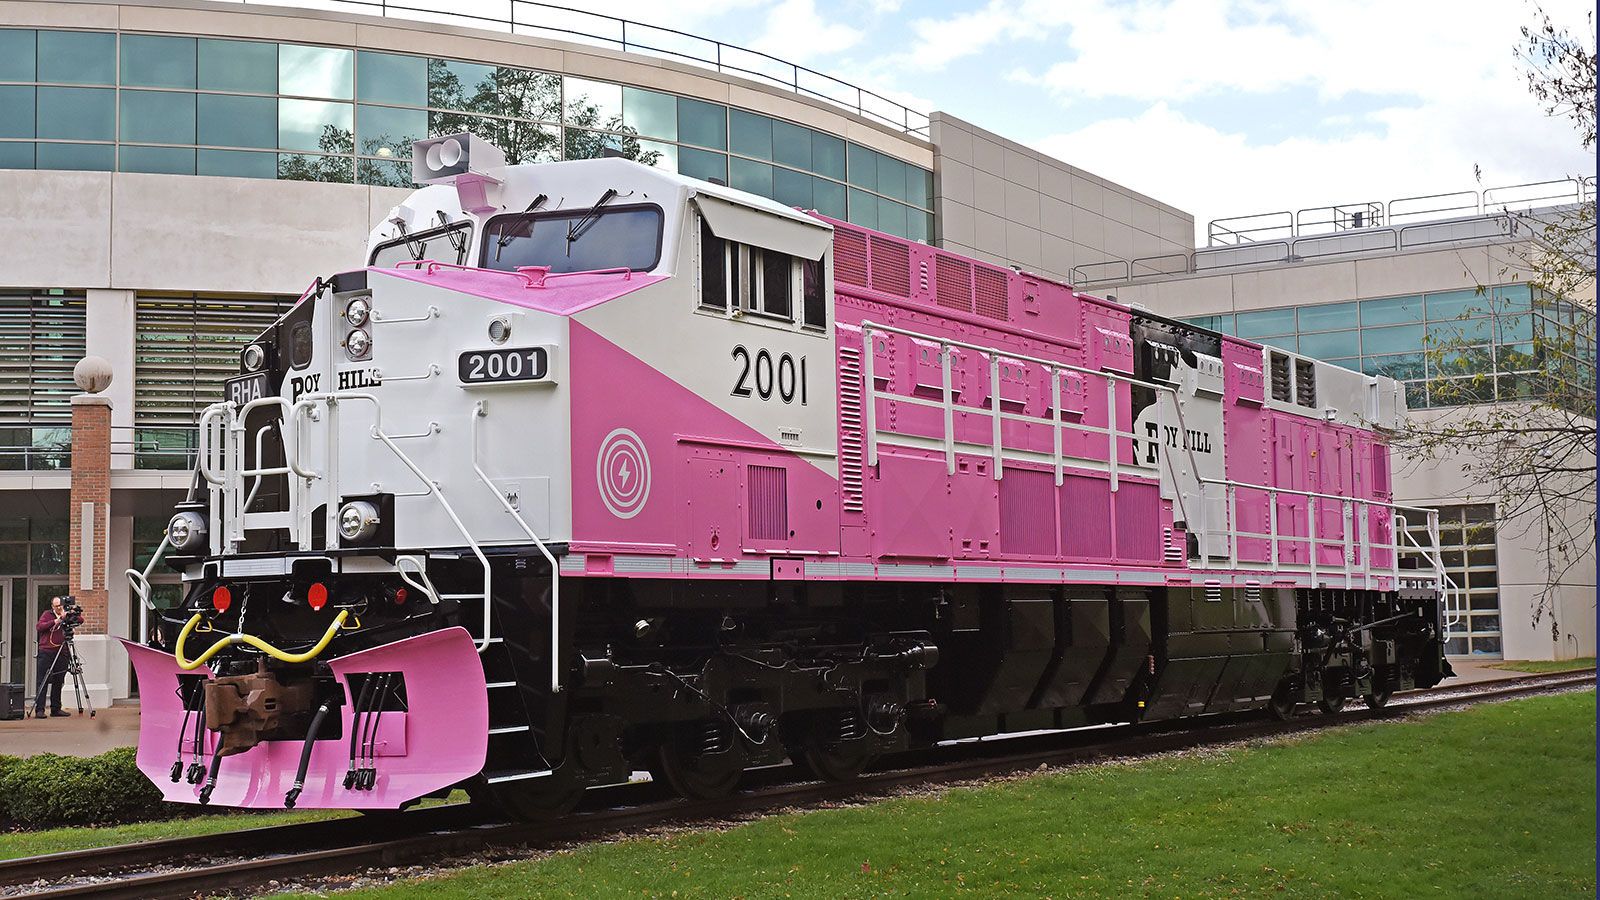 The pink livery symbolises Roy Hill's commitment to contributing to breast cancer research. To commemorate the FLXdrive’s premiere, Wabtec donated $50,000 to Linked By Pink